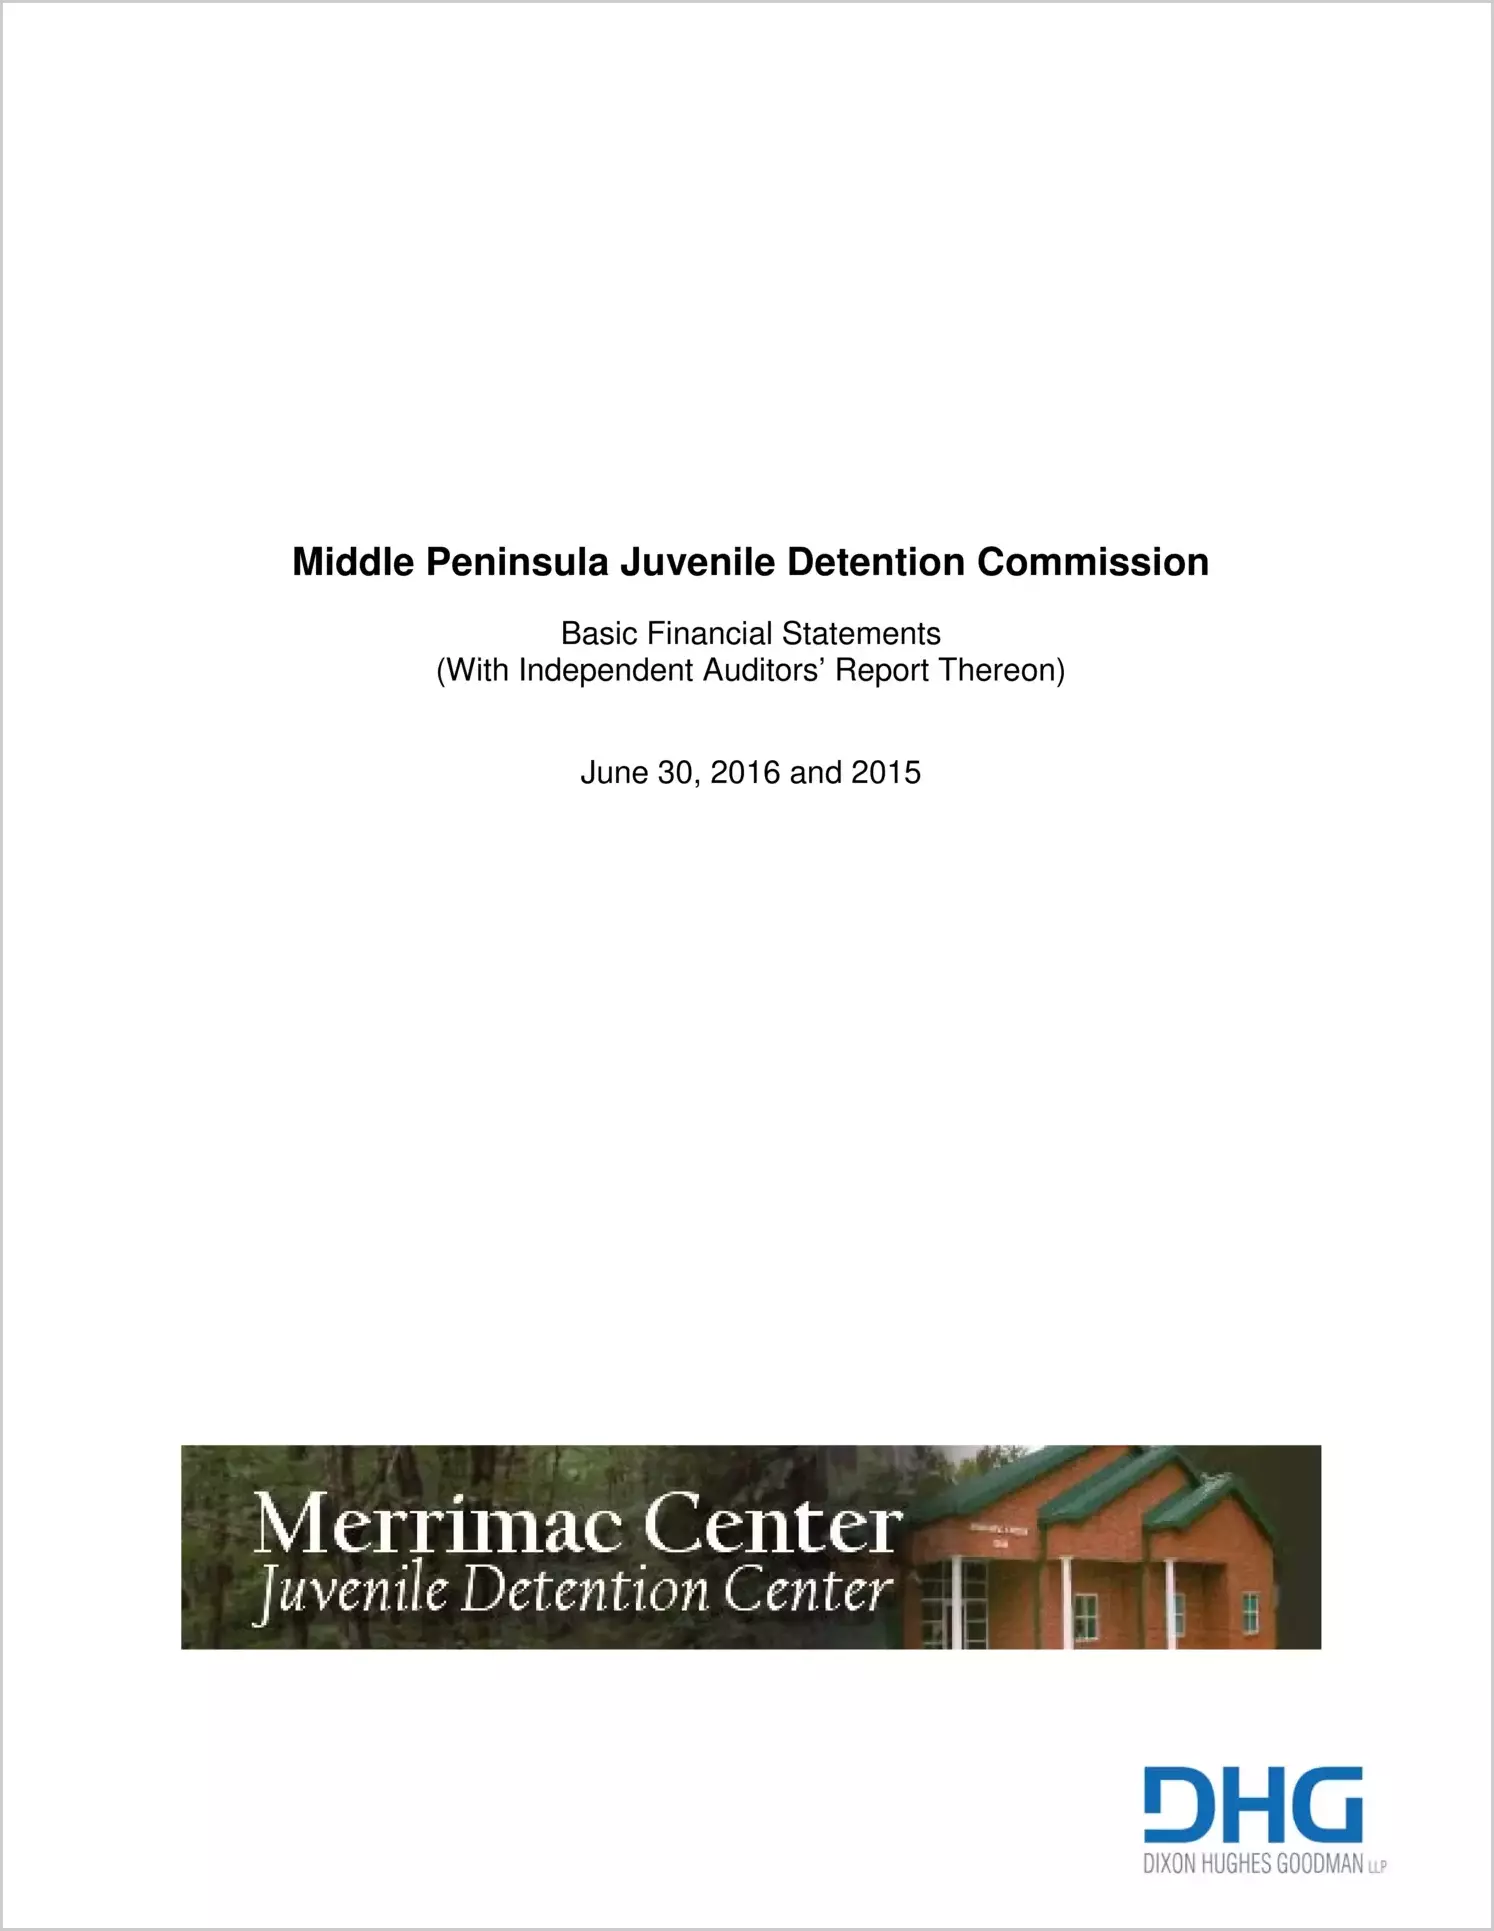 2016 ABC/Other Annual Financial Report  for Middle Peninsula Juvenile Detention Commission